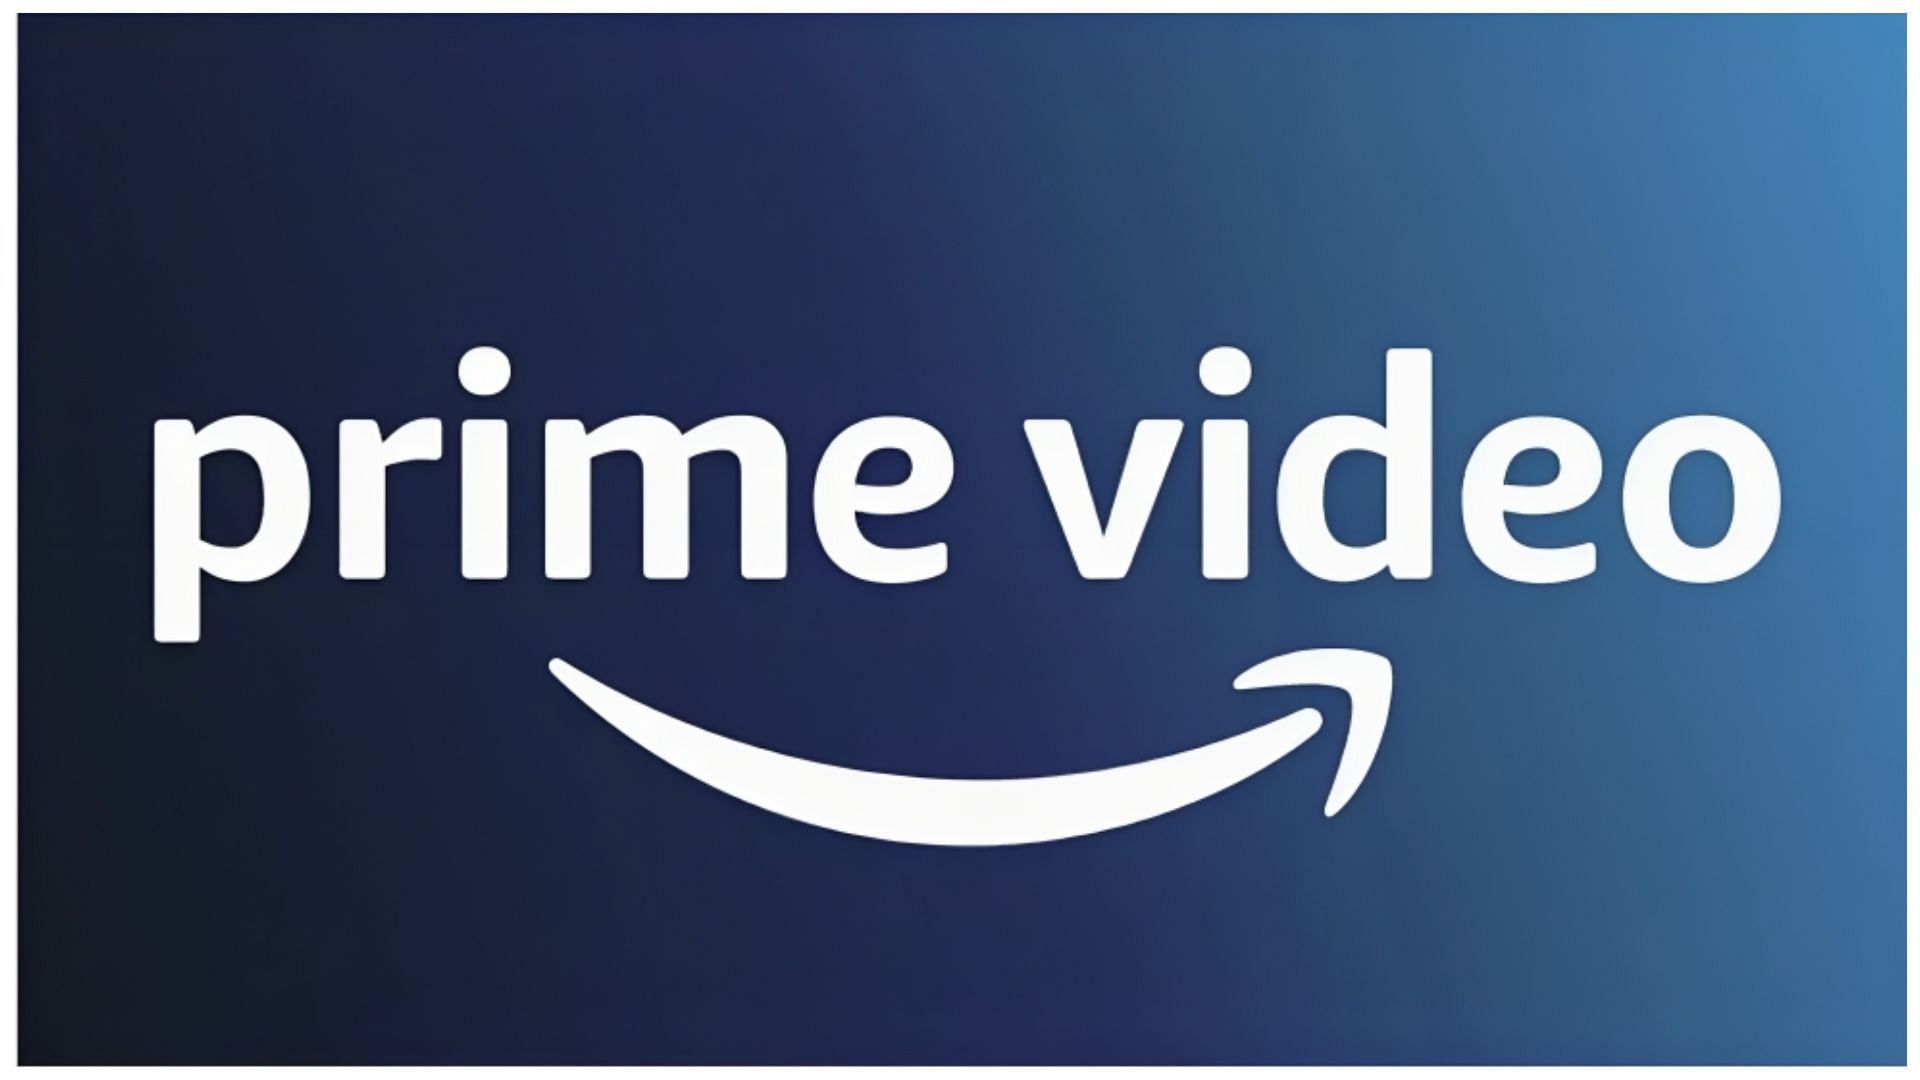 Prime video is now including ads in their shows (Image via Amazon Prime Video)